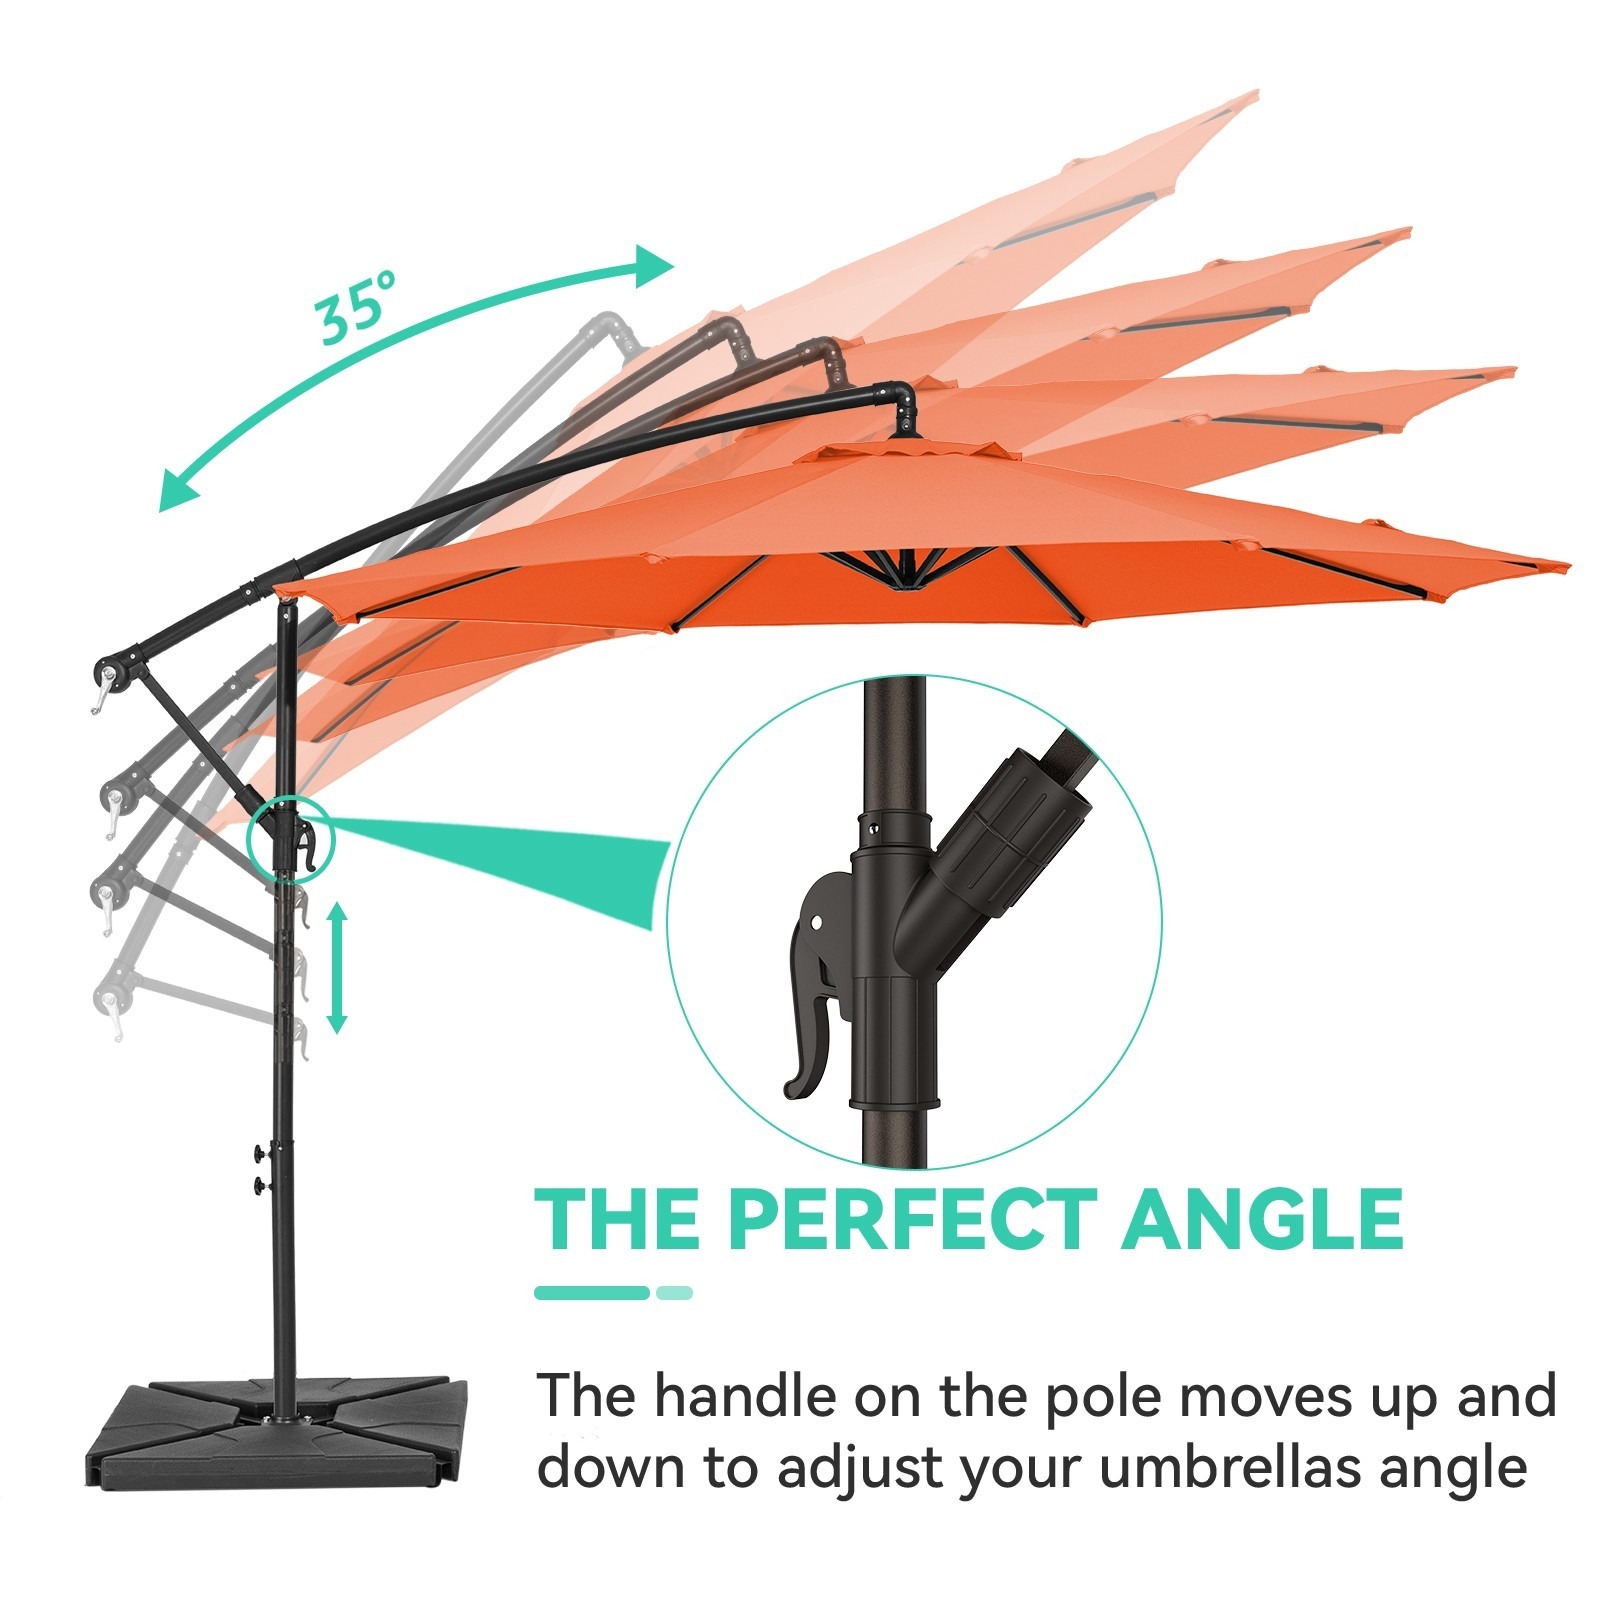 Serwall 10ft Heavy Duty Patio Hanging Offset Cantilever Patio Umbrella W/ Base Included, Orange - image 3 of 6